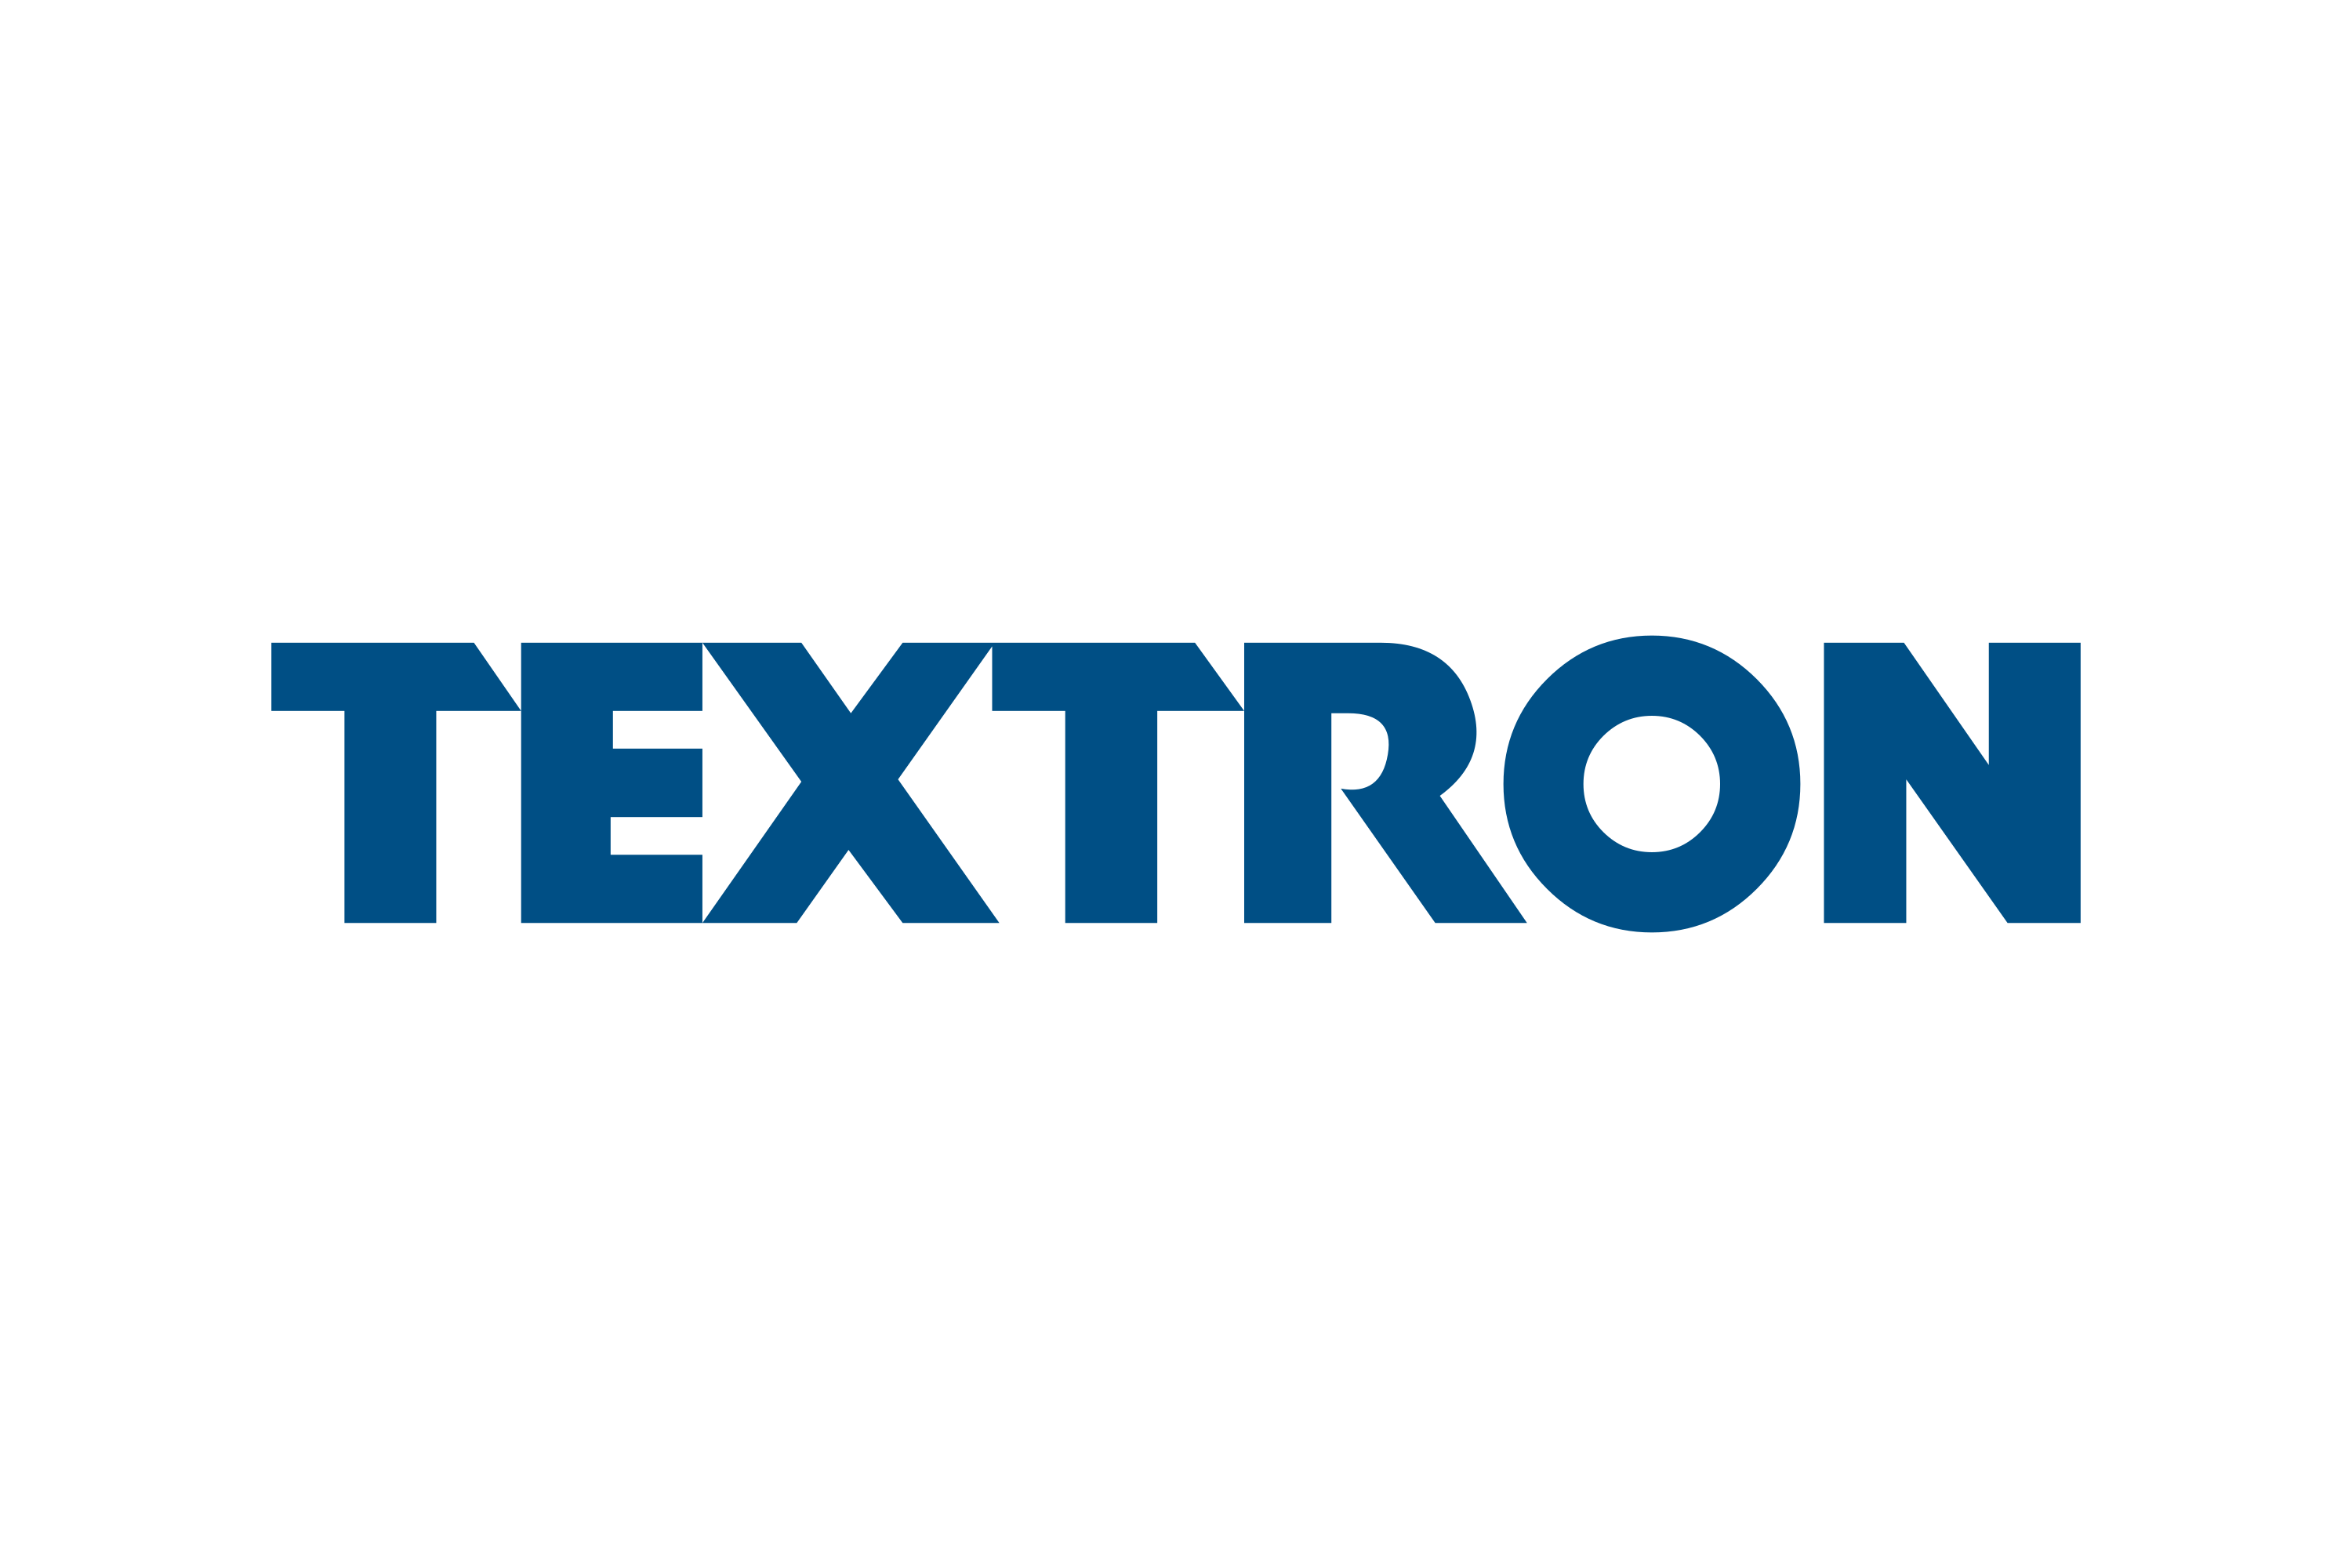 Electrical Engineer – Textron